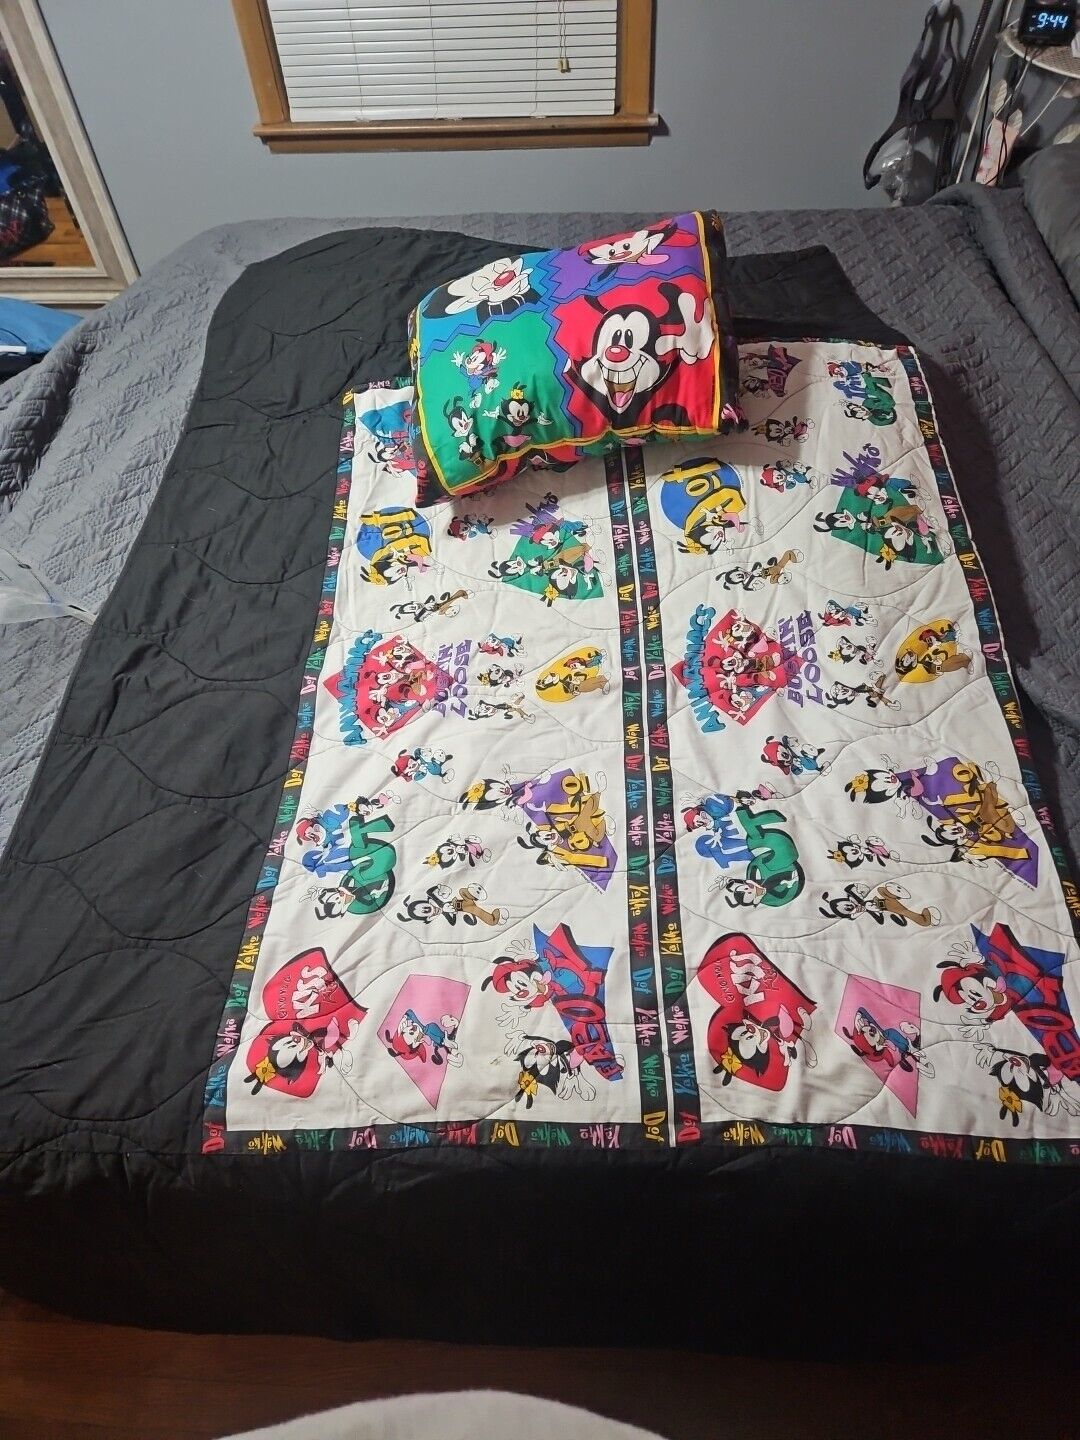 WARNER BROS ANIMATION ANIMANIACS PILLOW AND TWIN SIZED BLANKET